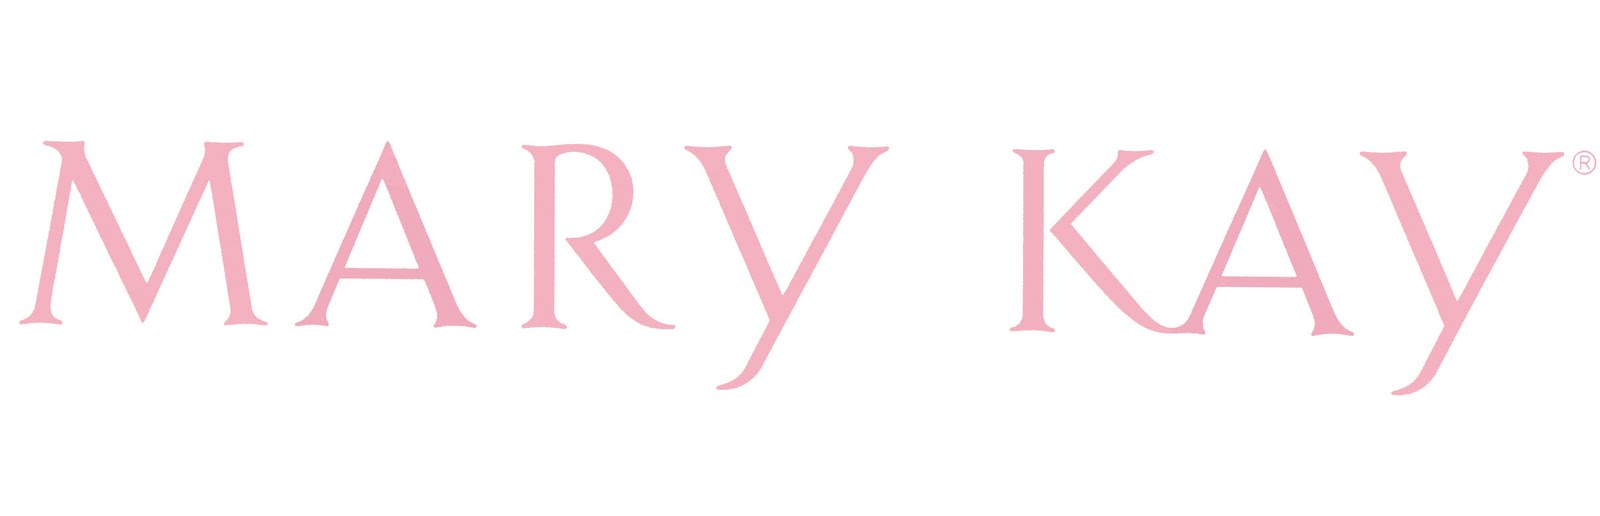 Mary Kay Logo Png - ClipArt Best